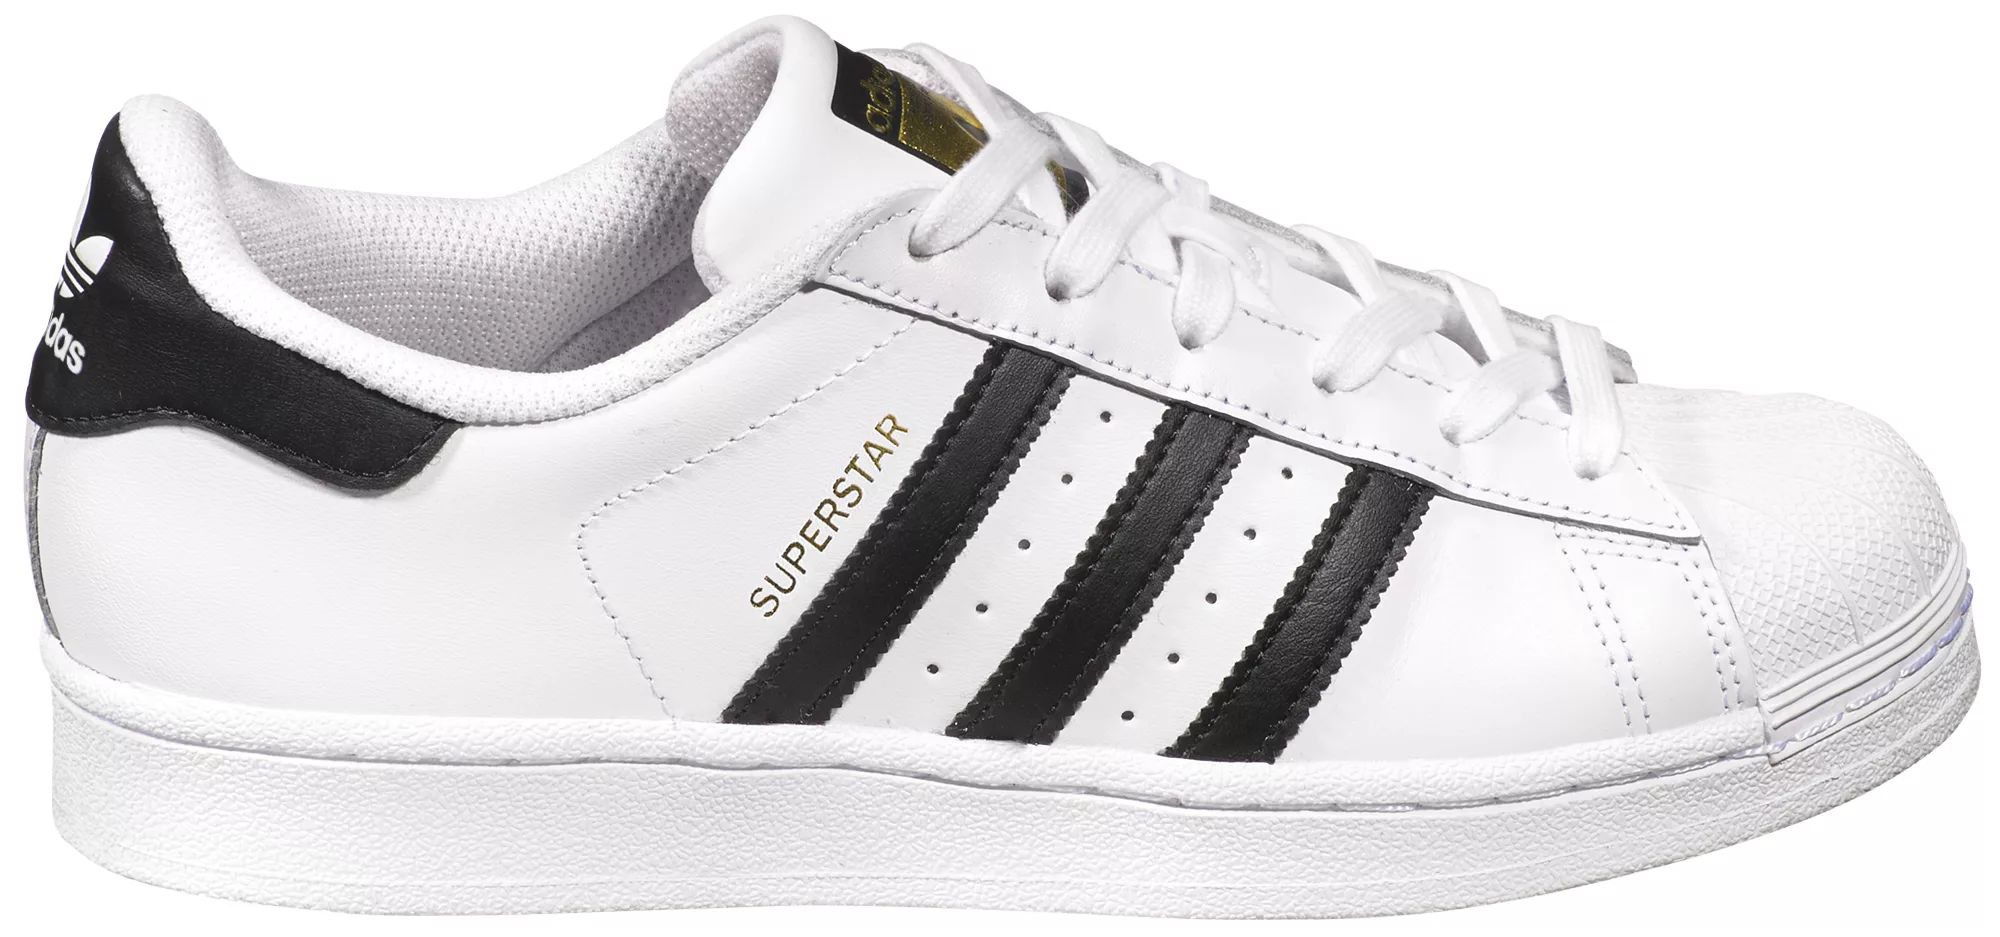 adidas Originals Women's Superstar Shoes, Size: 6.0, White | Dick's Sporting Goods